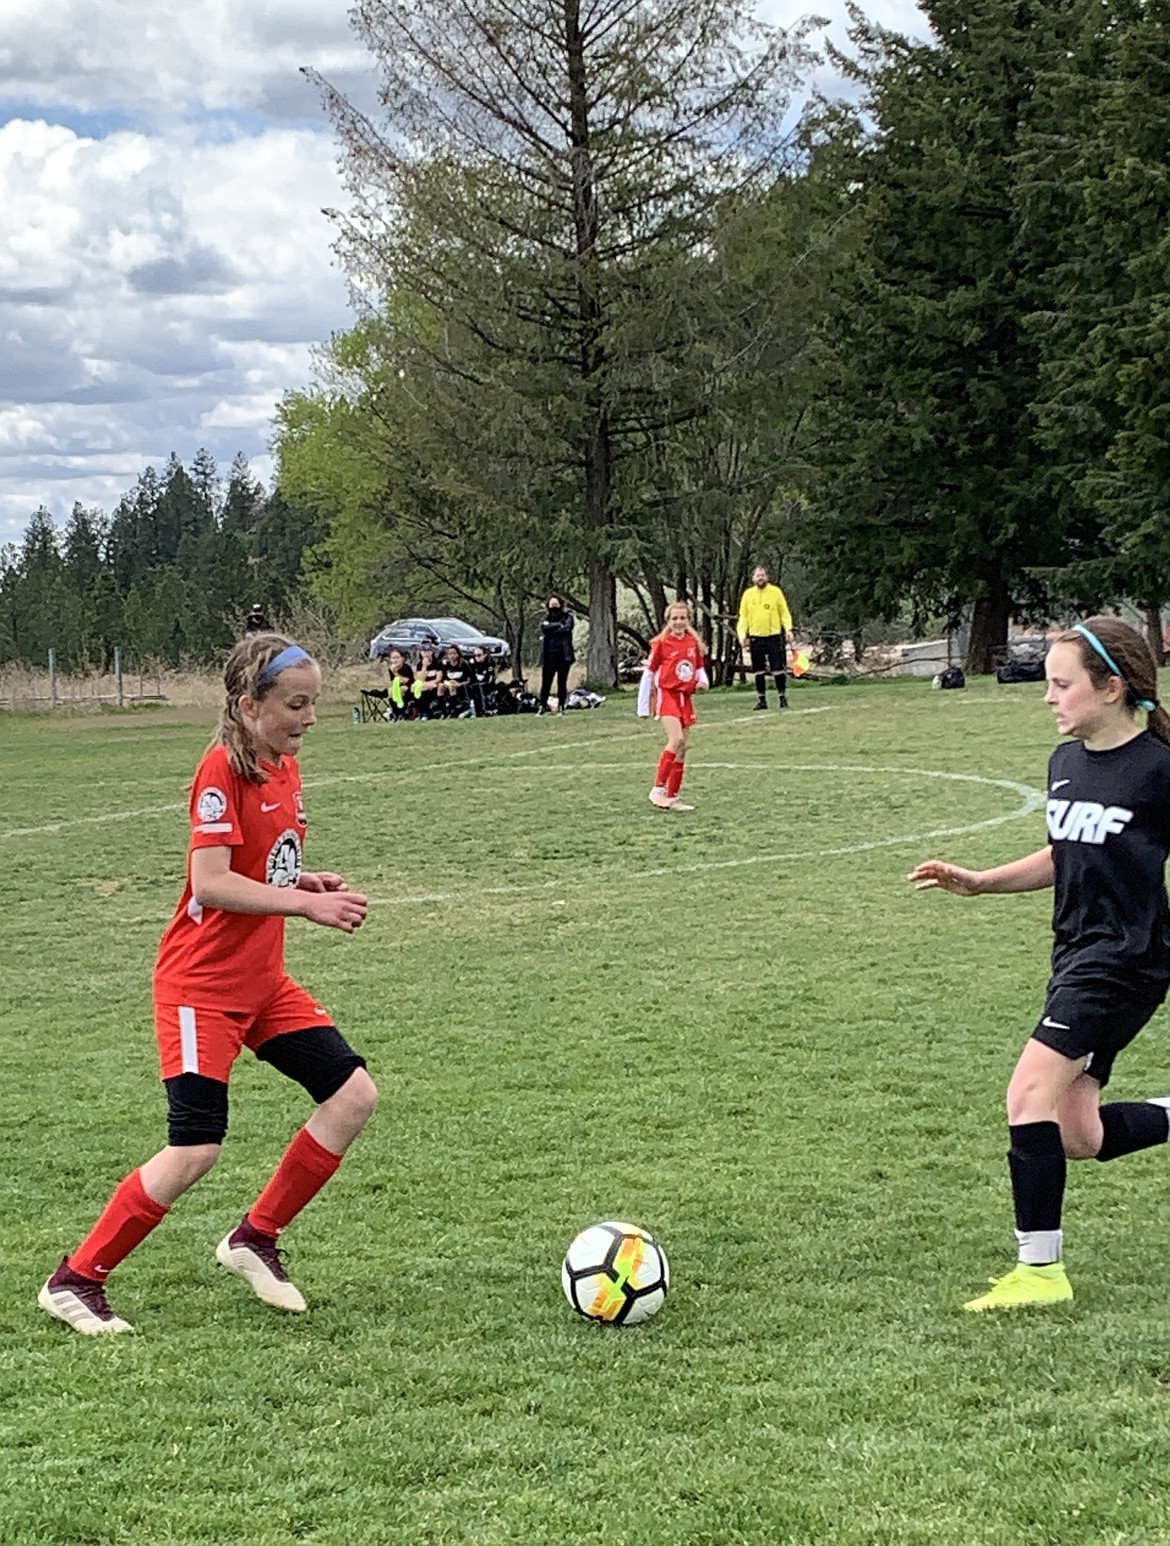 Courtesy photo
Pictured are Sierra Shepherd, left, and Tayla Ruchti, rear. The North Idaho Thorns 2009 Green closed out the weekend with wins vs WESC South on Saturday and FC Spokane on Sunday. Thorns goals were scored by Ava Roberts, Aspen Lilliard, Katie Kovatch, Phinalley Voigt, Tayla Ruchti and Ryann Blair. Goalkeeper Maddie Witherwax had 11 saves.